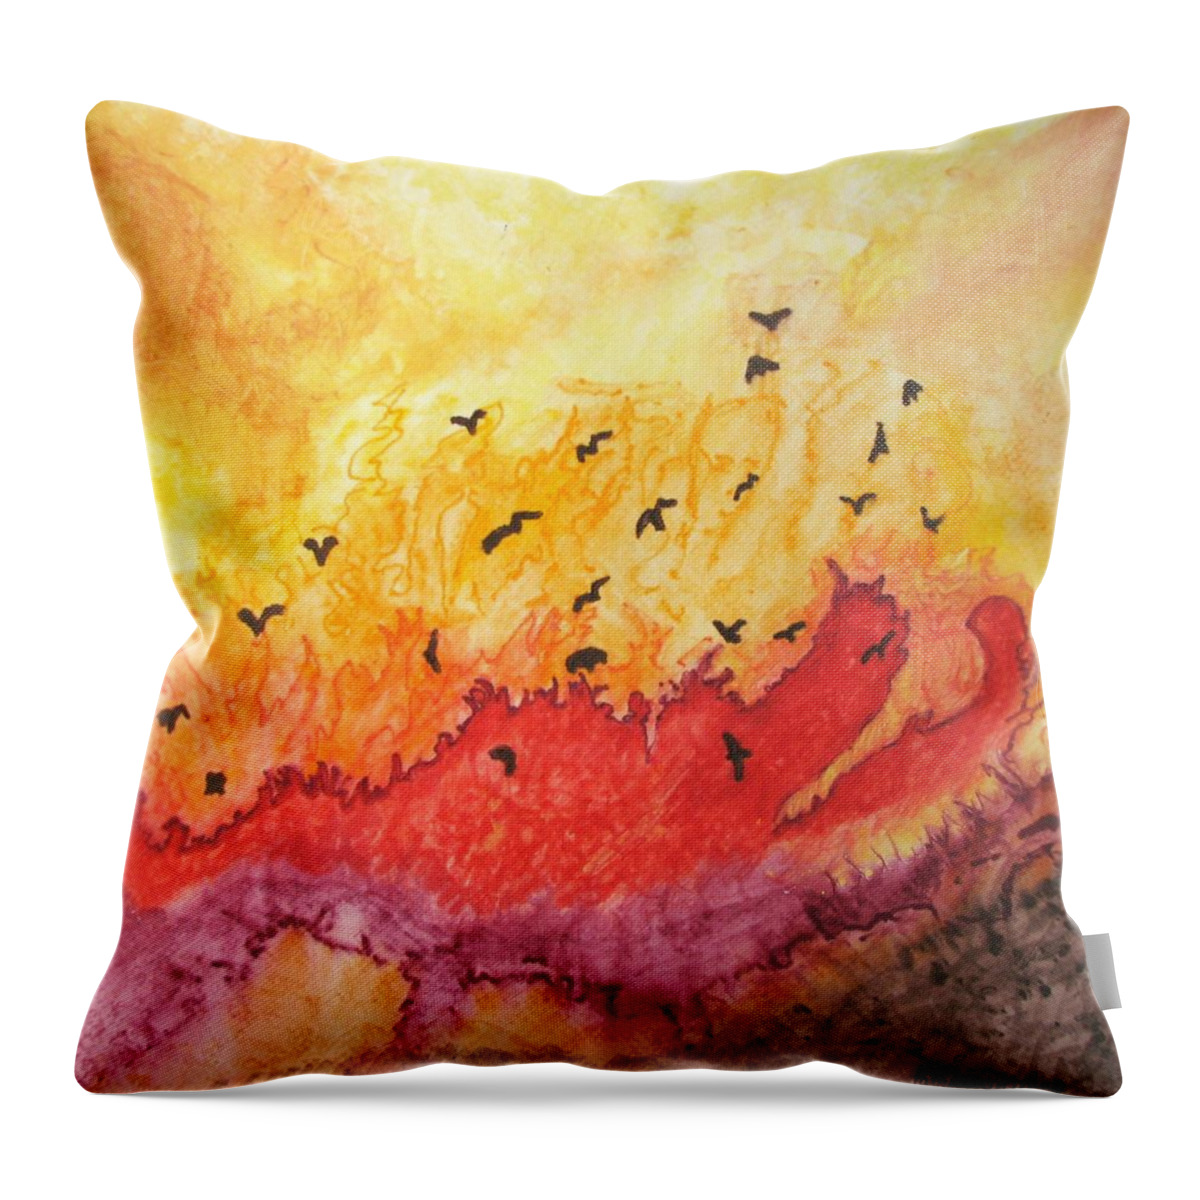 Birds Throw Pillow featuring the painting Fire Birds by Patricia Arroyo